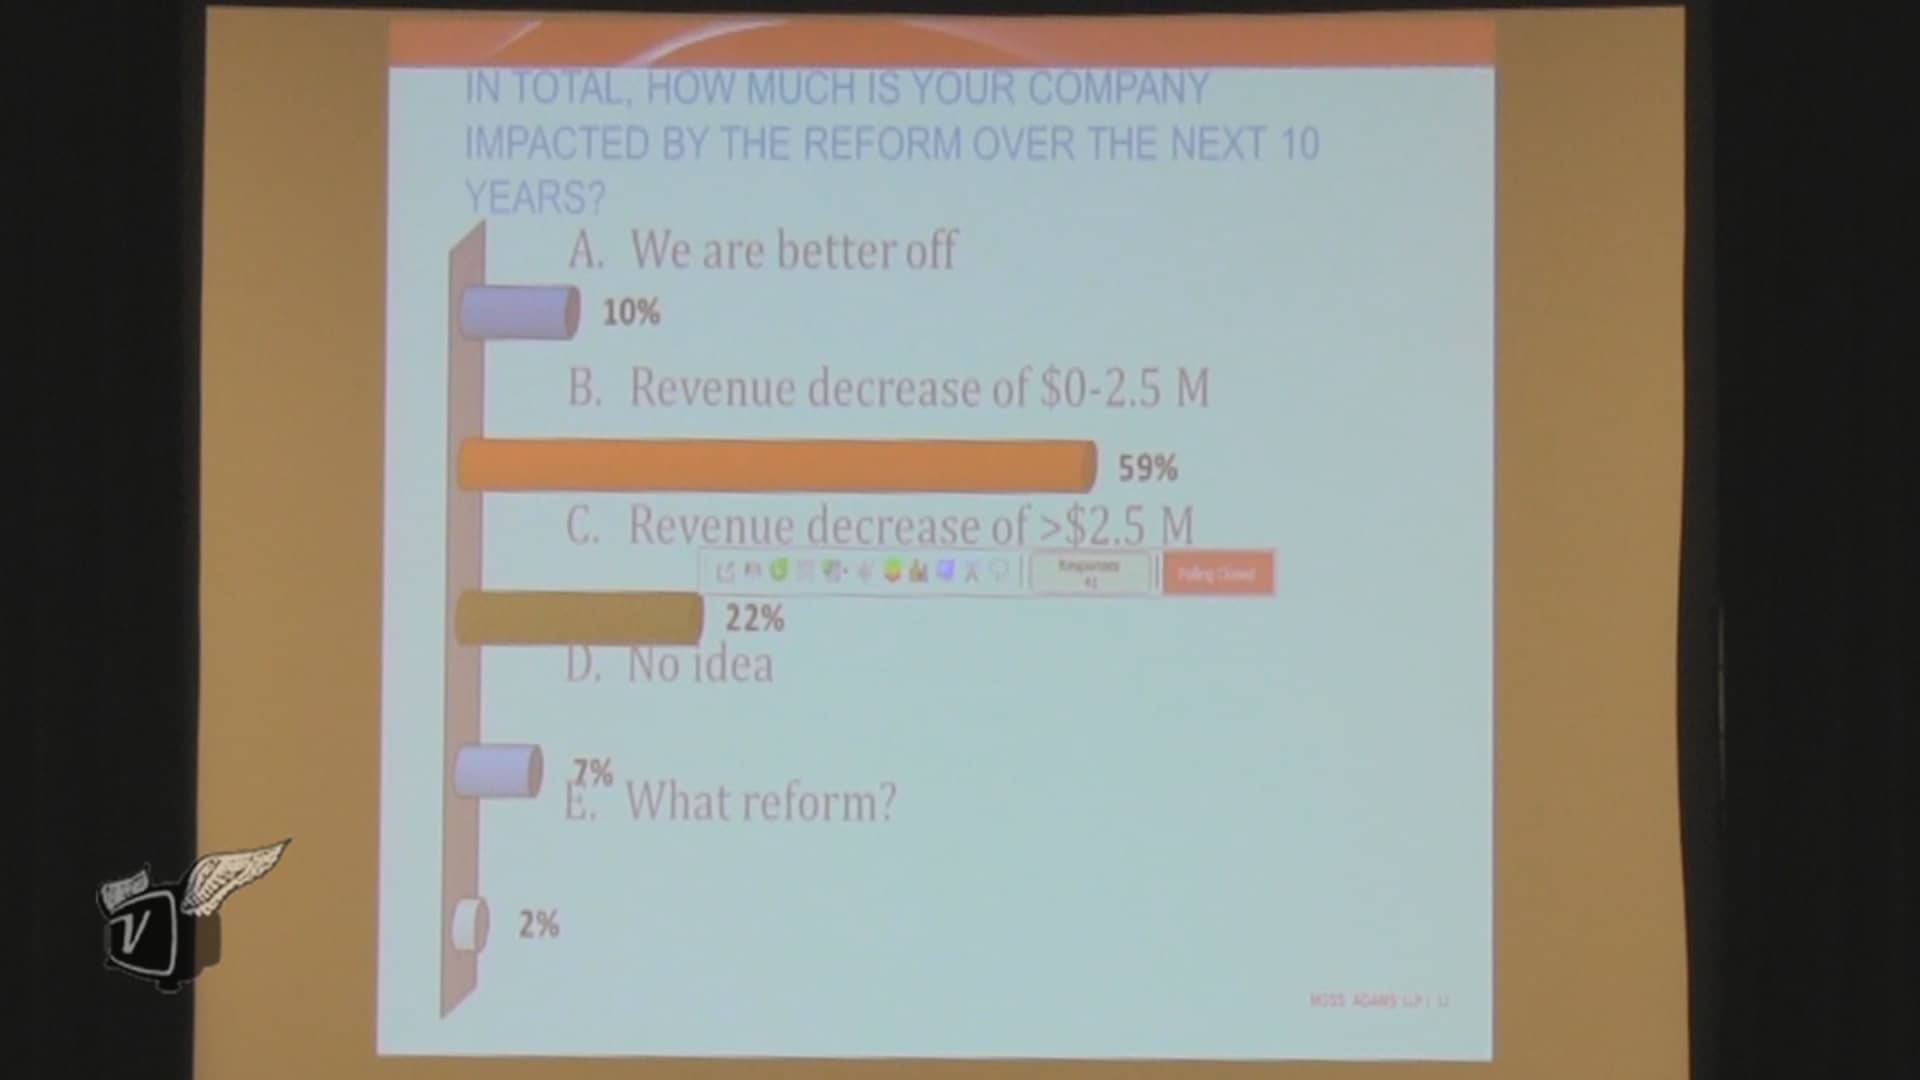 Survey results from a Moss Adams poll at the 2014 NTCA Finance and Accounting Conference in San Jose.